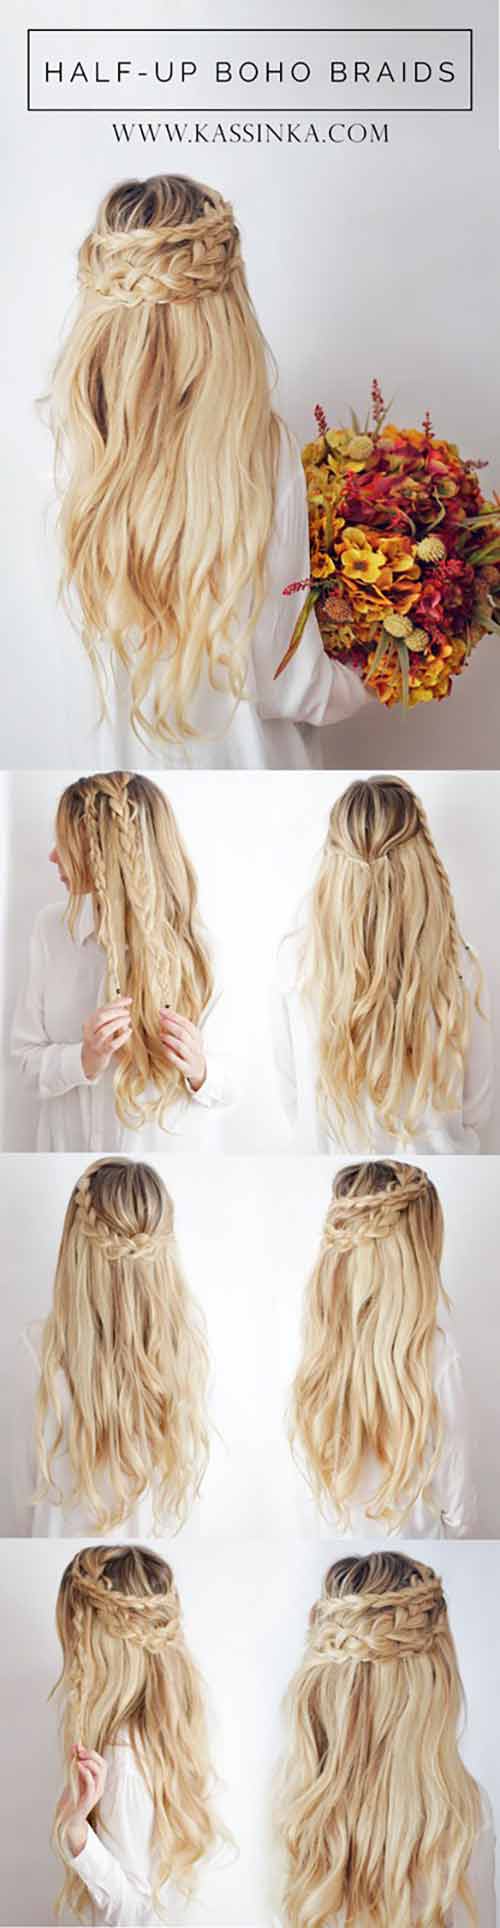 Steps to tie your hair in half up boho braids